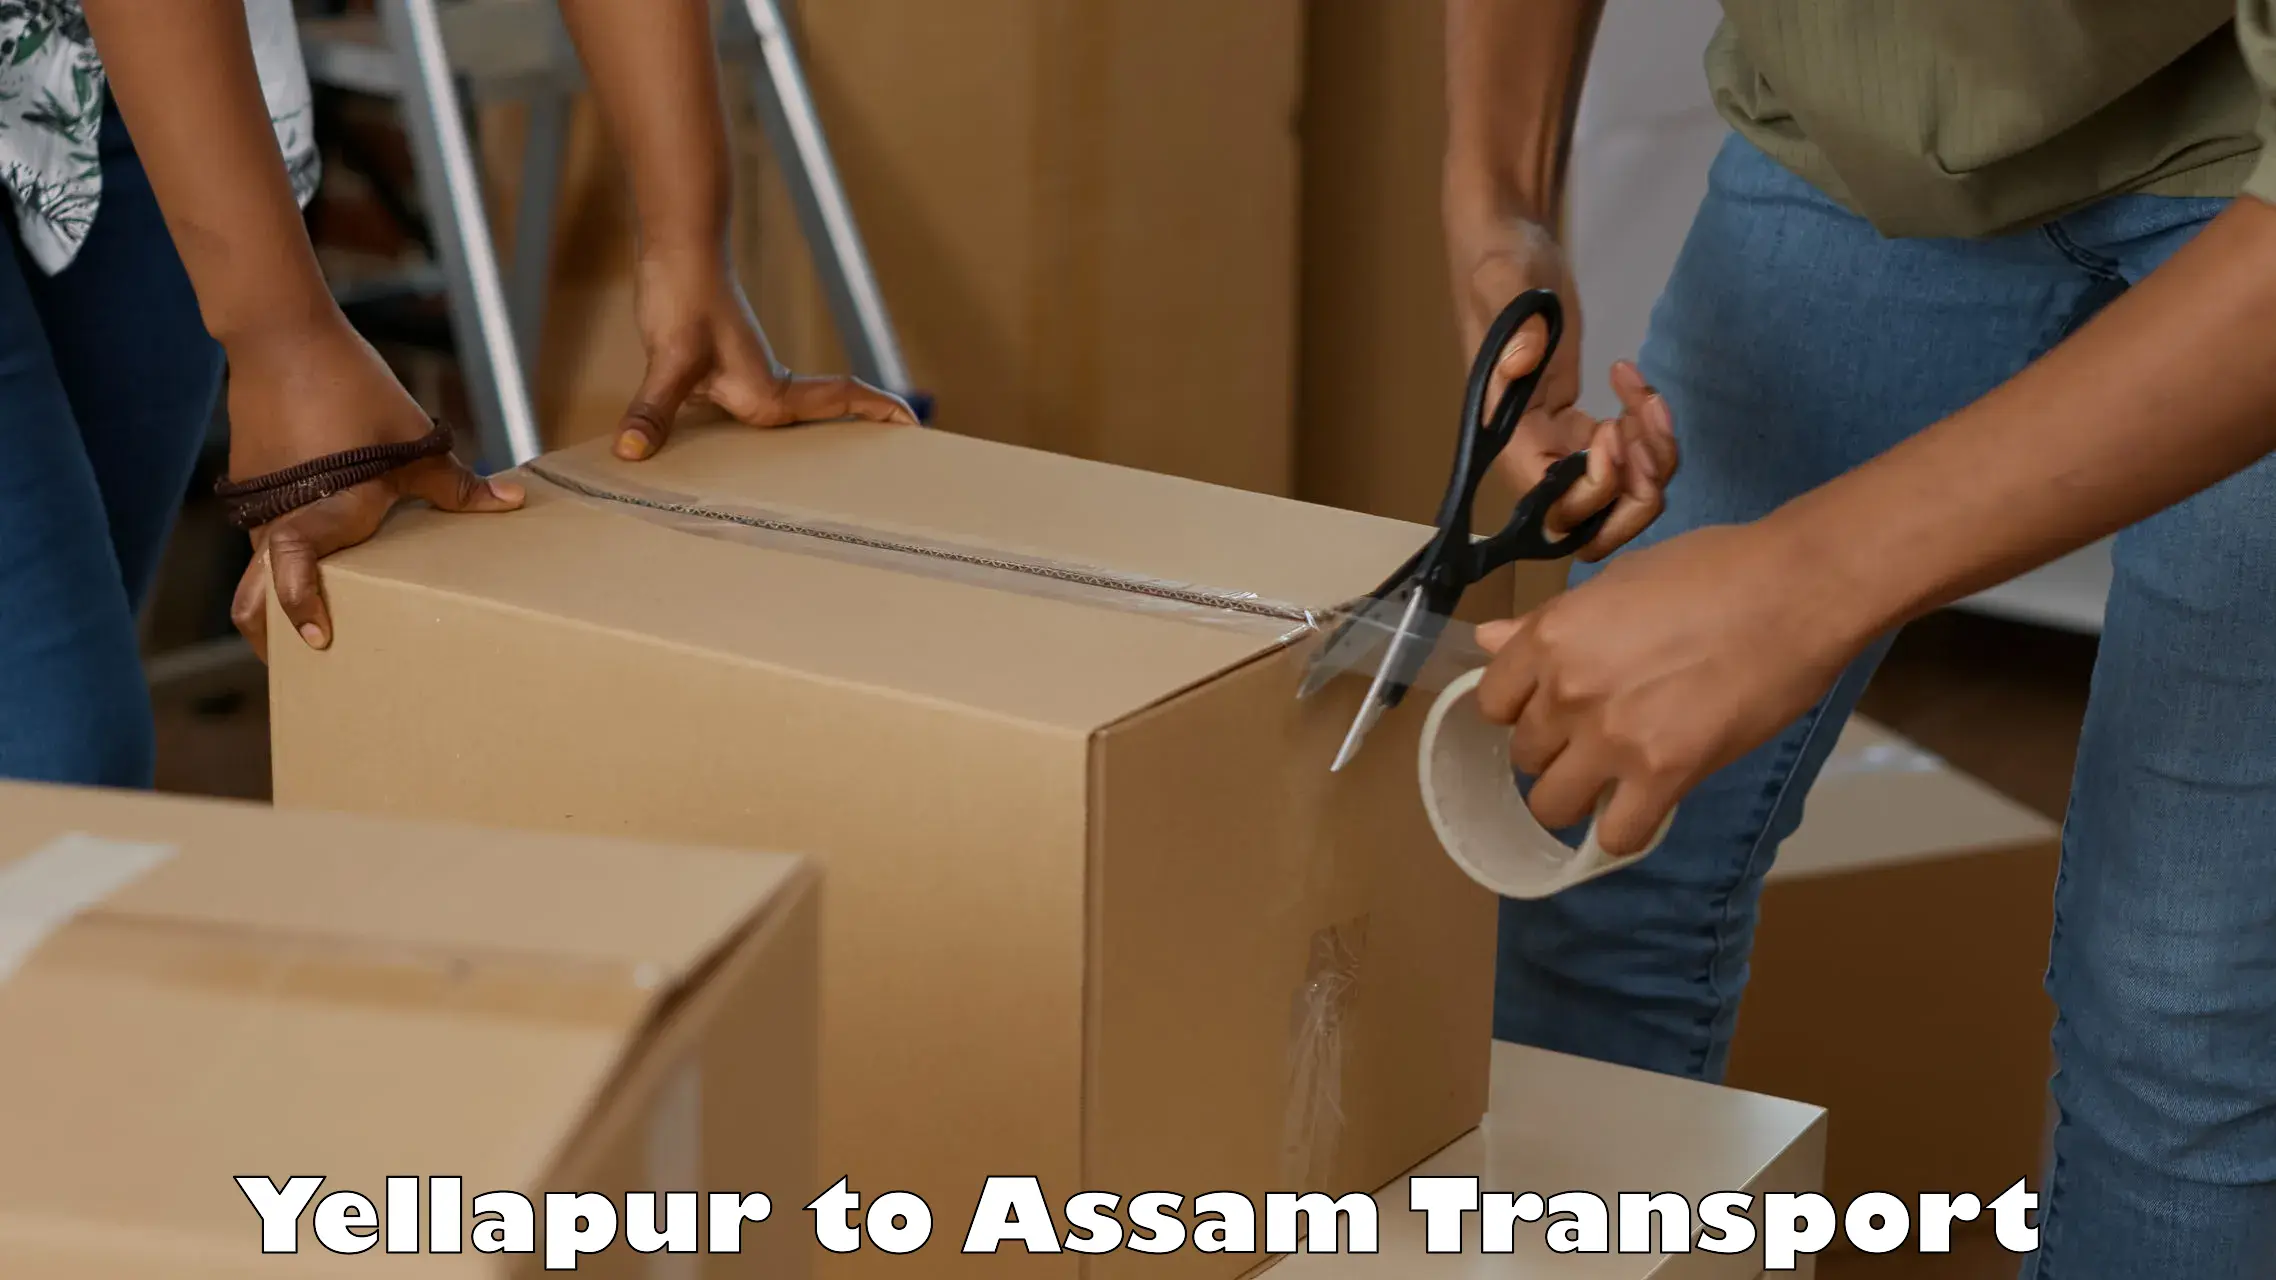 Truck transport companies in India Yellapur to Cachar